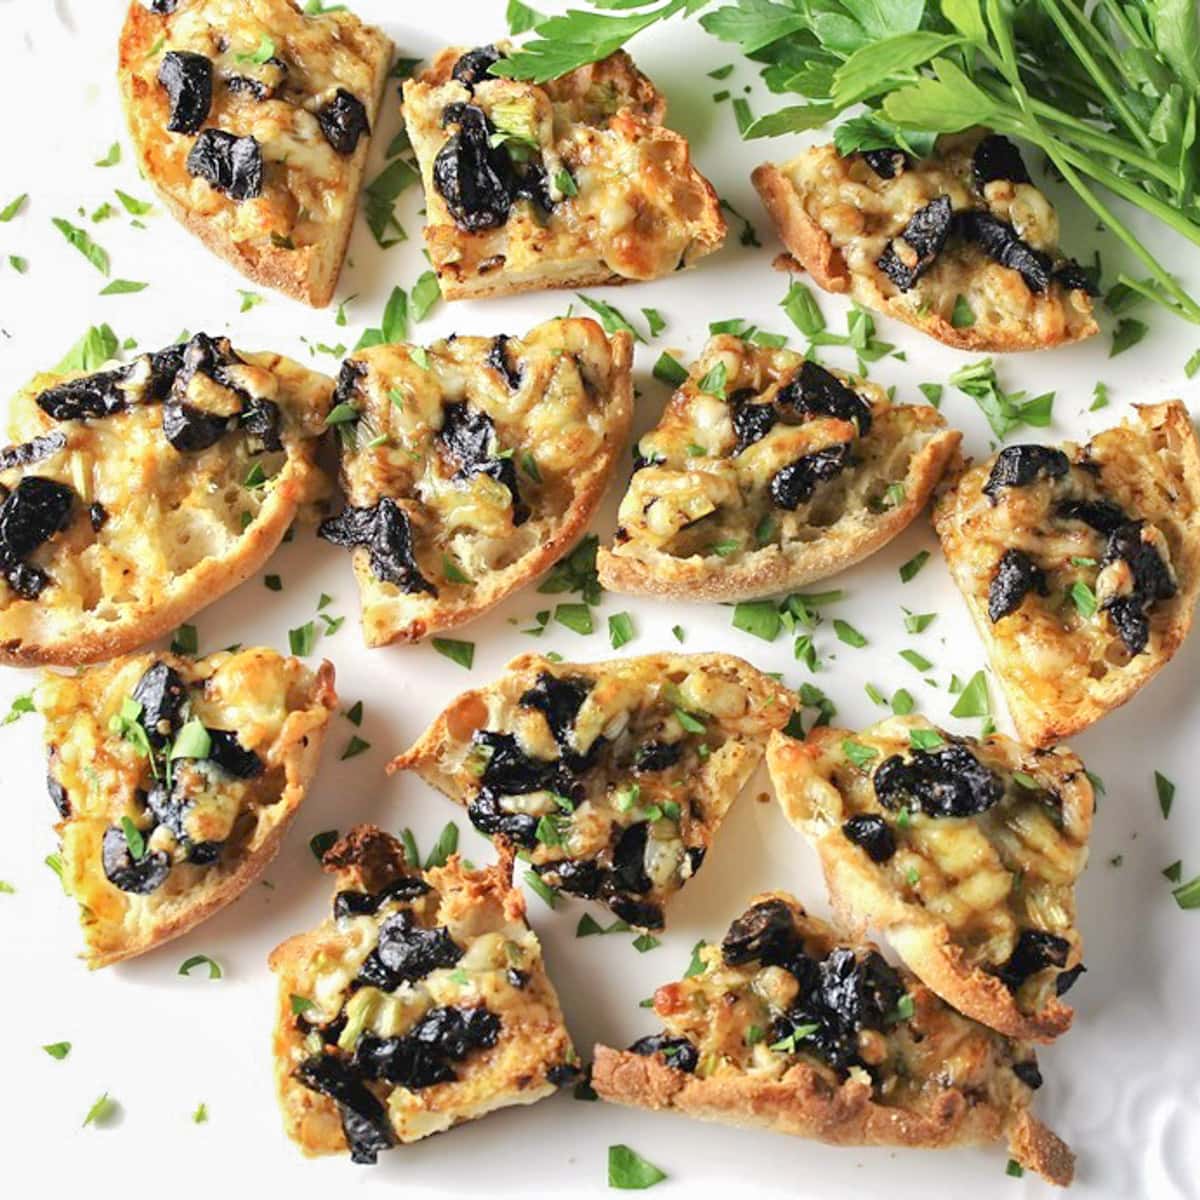 Cheese and Olive Appetizers (Baked, 20 Minutes)